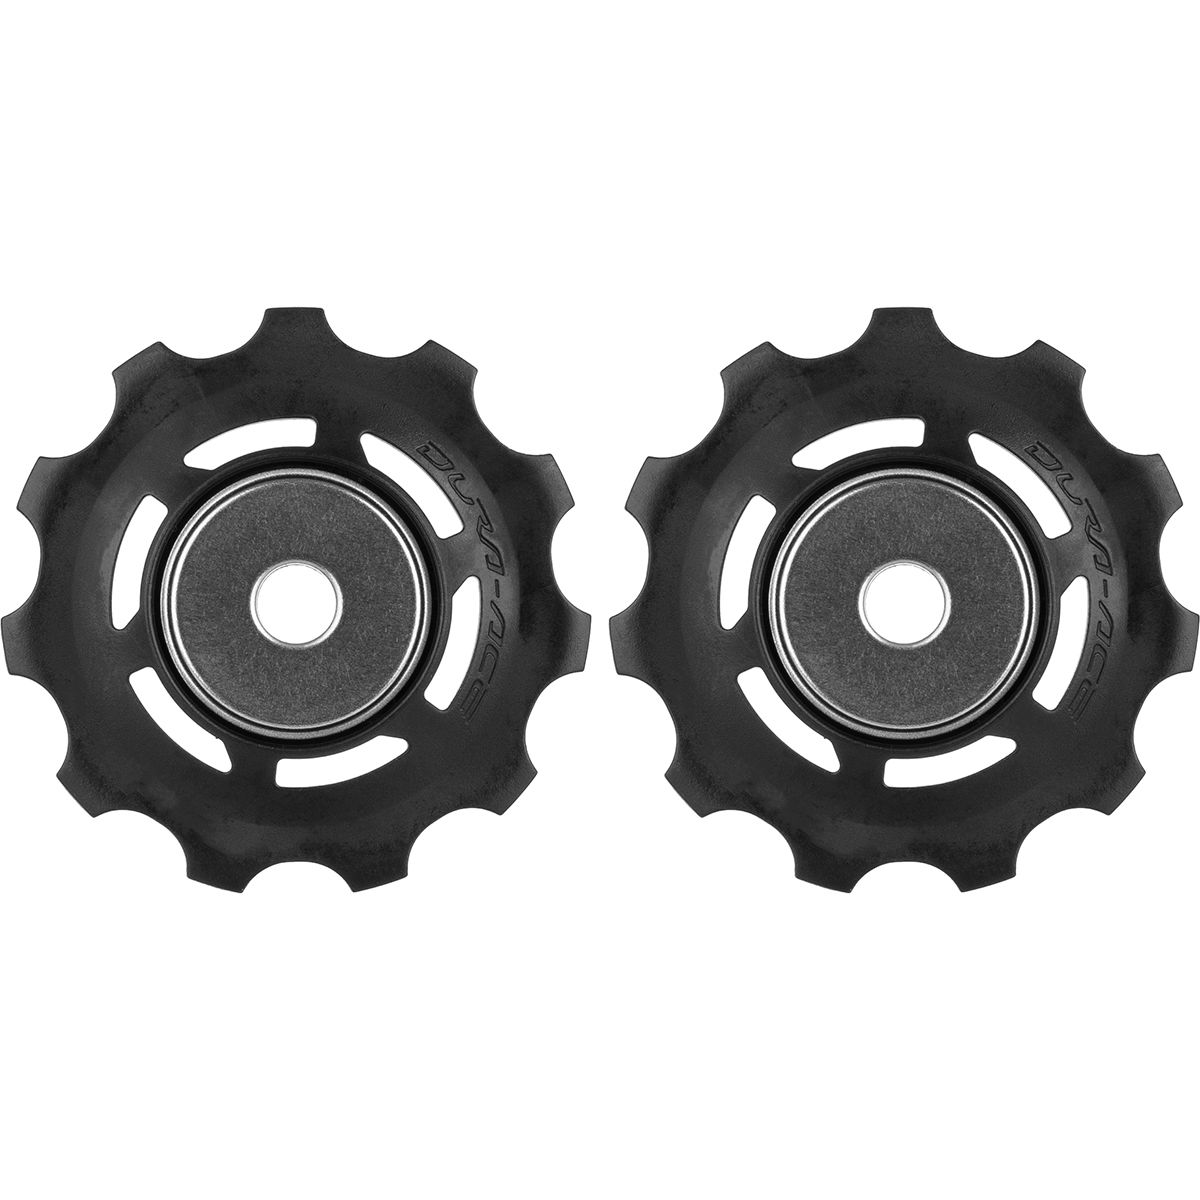 Shimano Dura-Ace 11 Speed Road Pulley Wheel Kit